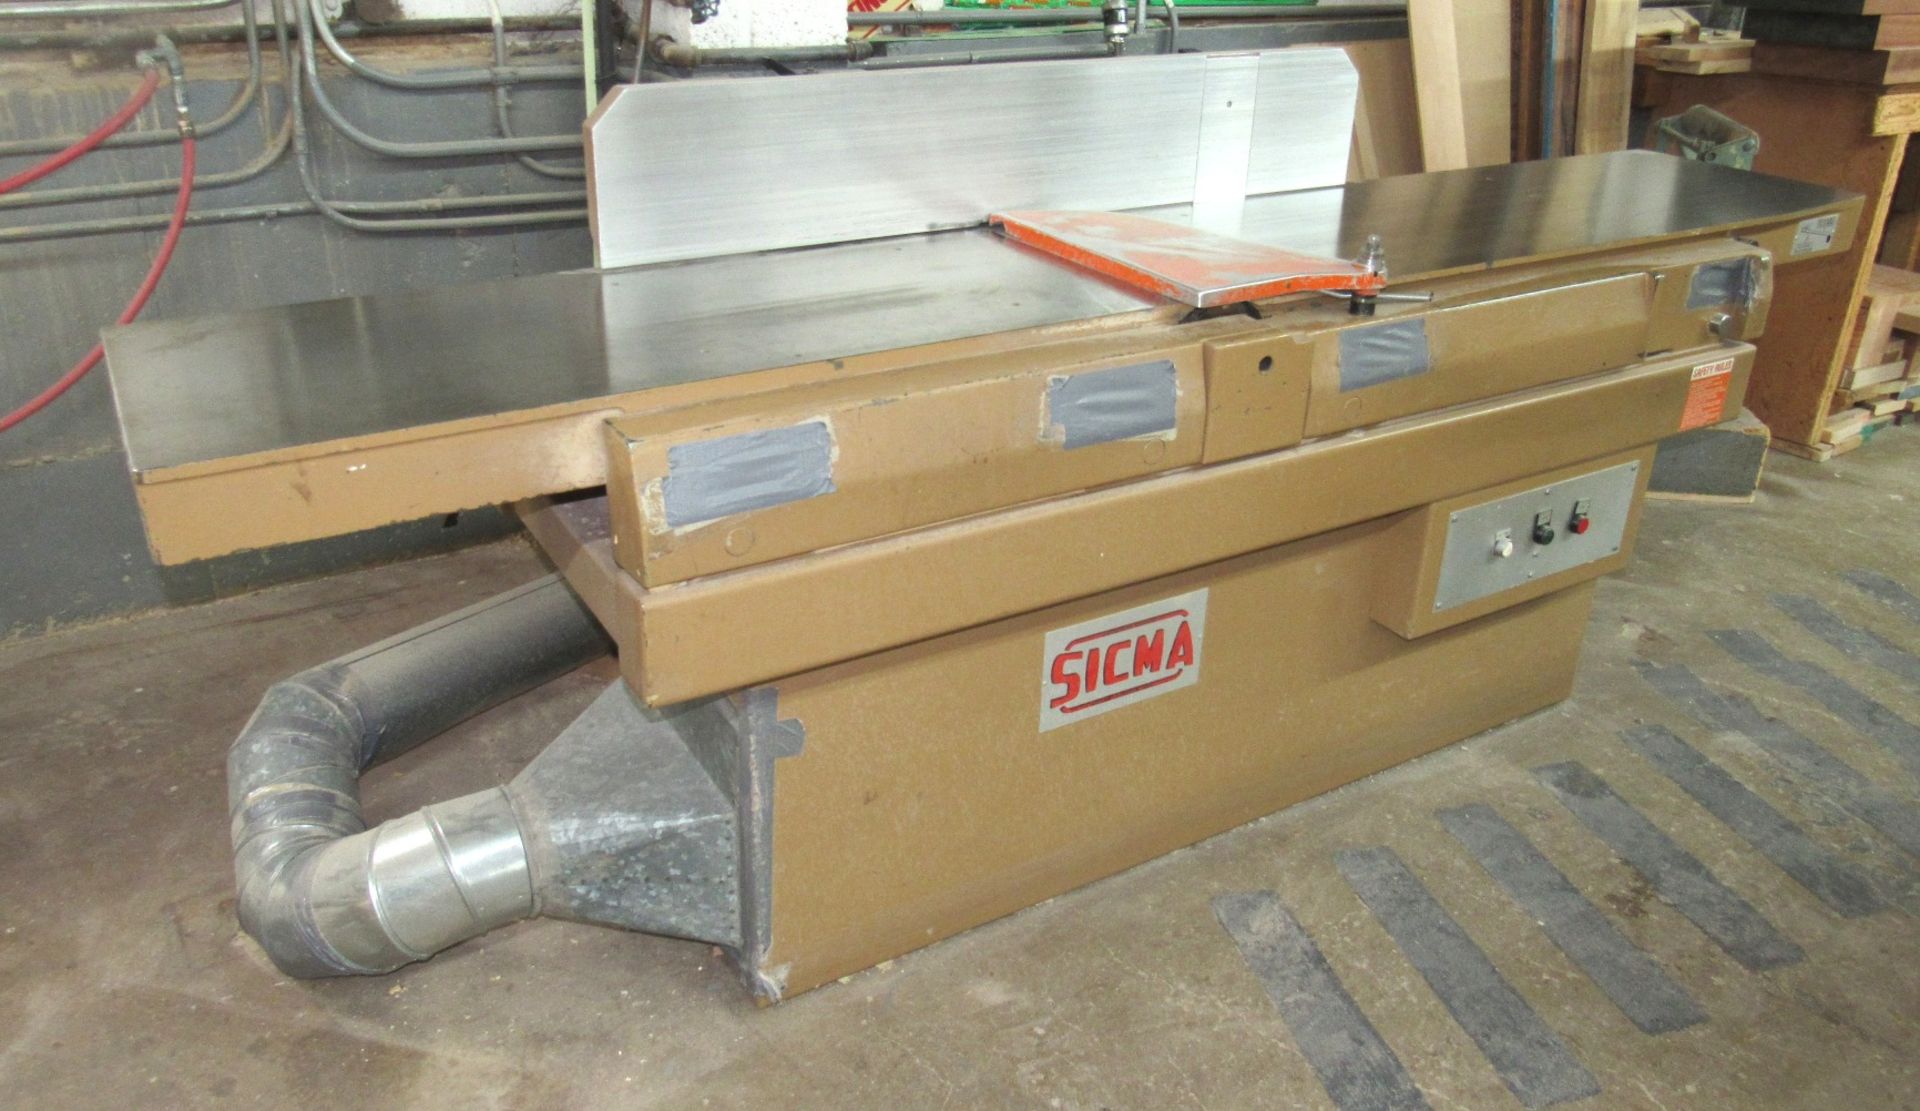 Sicma Mod.DT430 17" Wood Jointer - S/N 4030989, 98" Table Length, 7.5HP, 220/3/60 - Image 2 of 5